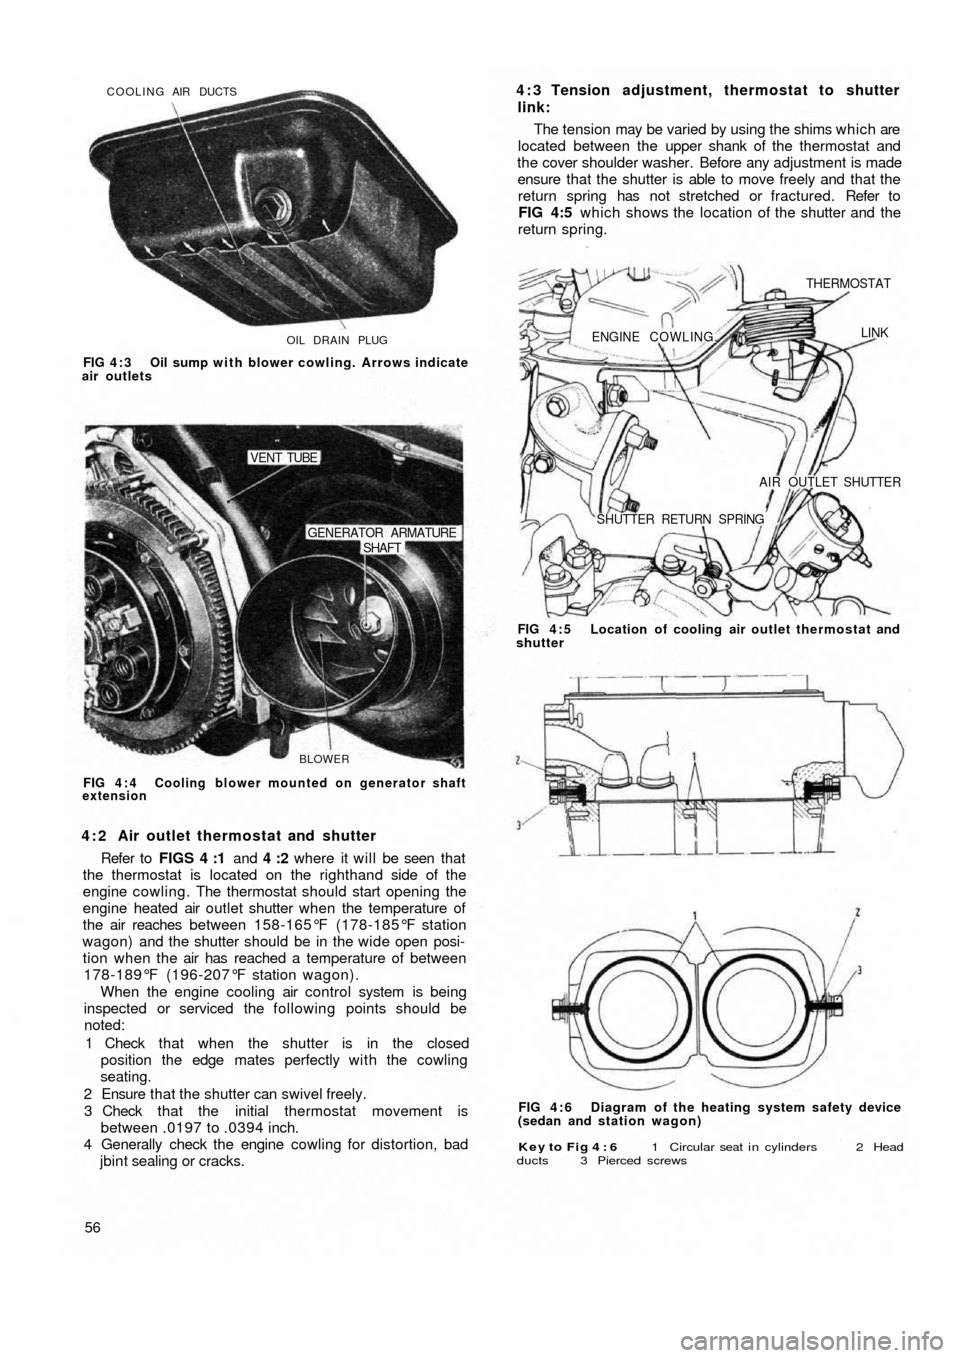 FIAT 500 1964 1.G Service Manual OIL DRAIN PLUG COOLING AIR DUCTS
FIG 4 : 3  Oil sump with blower cowling. Arrows indicate
air outlets
BLOWER
SHAFT GENERATOR ARMATURE
VENT TUBE
FIG 4 : 4  Cooling blower mounted on generator shaft
ext